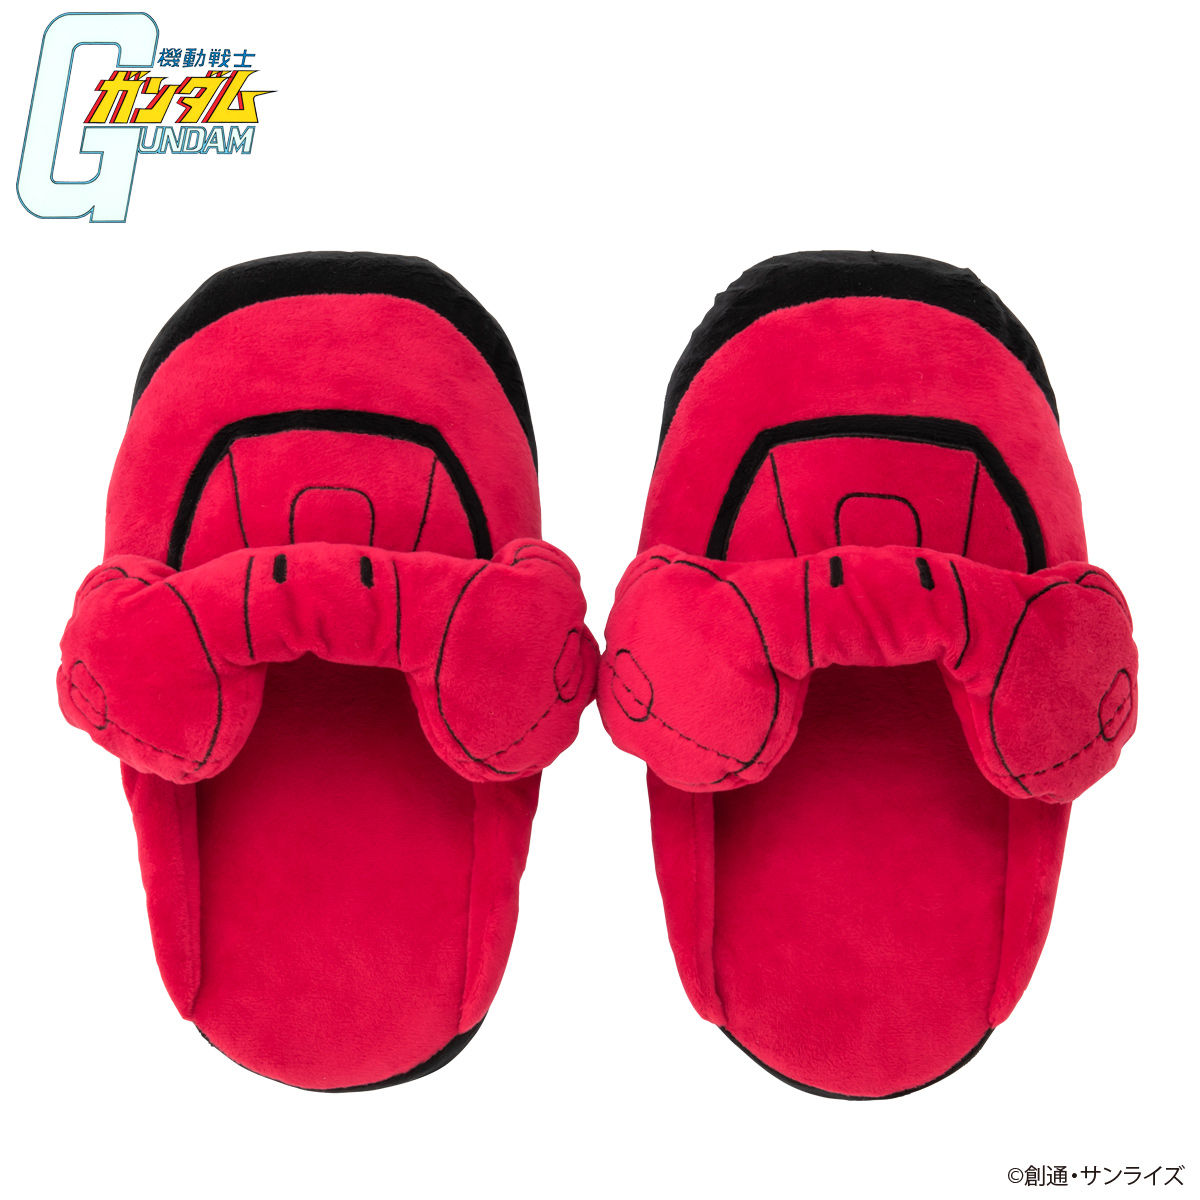 Mobile Suit Gundam Slippers | GUNDAM | PREMIUM BANDAI Online Store for Action Figures, Kits, and more